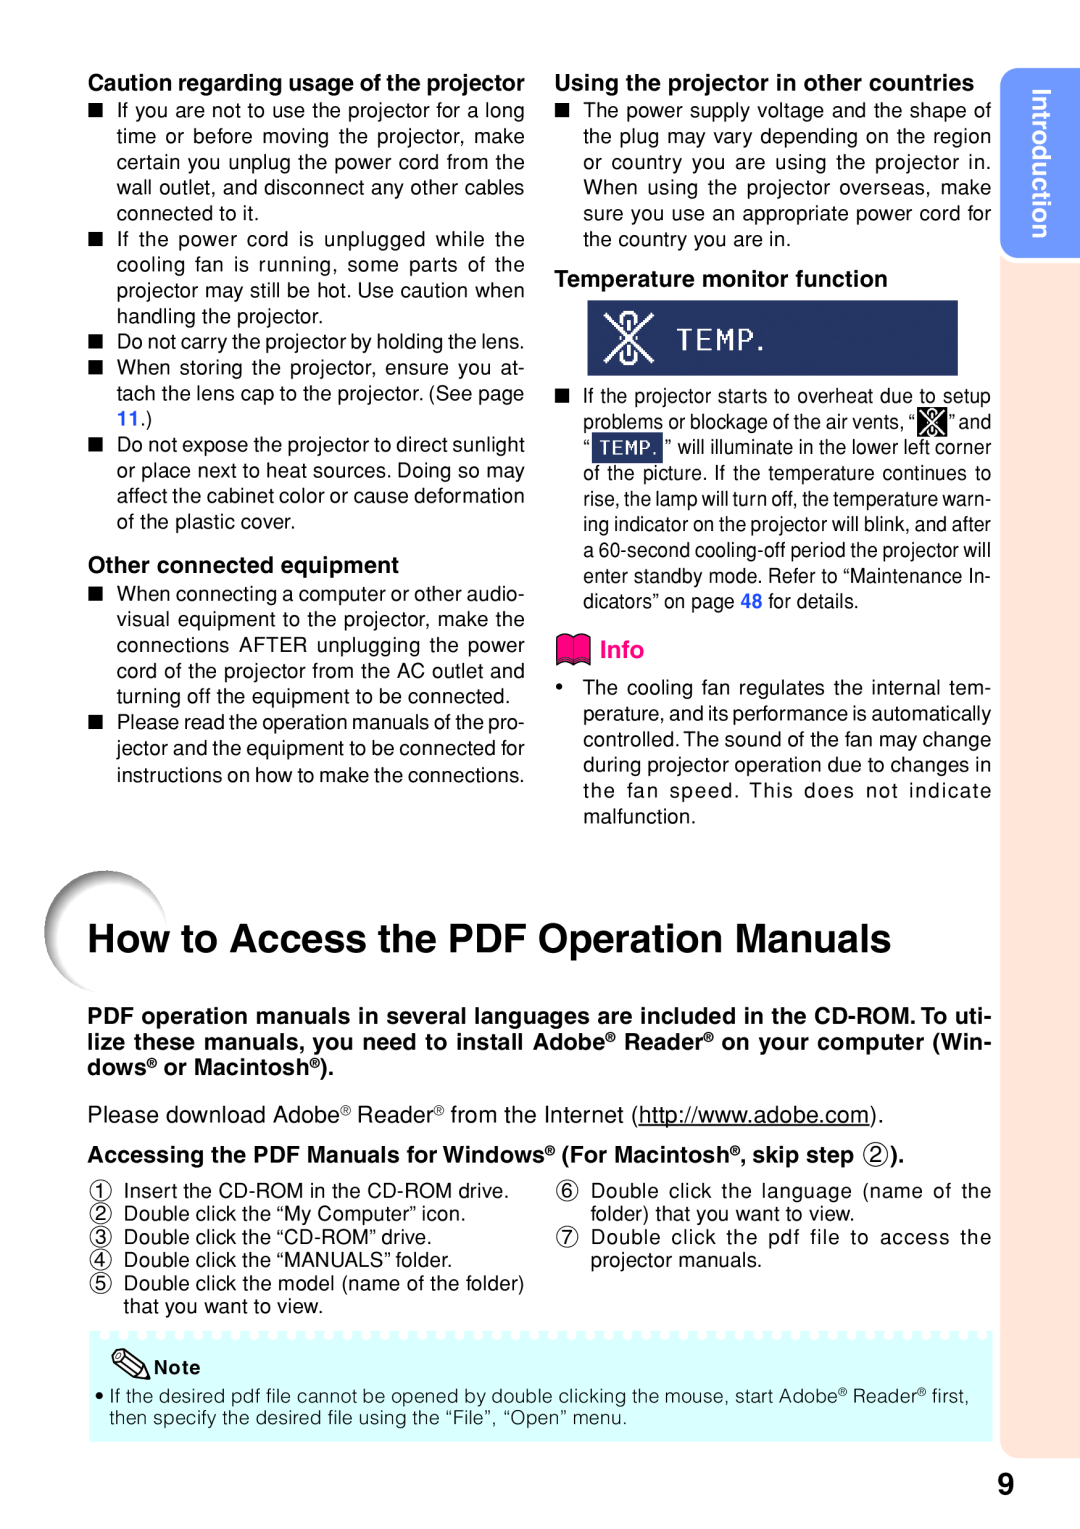 Sharp XG-F210X How to Access the PDF Operation Manuals, Info, Introduction, Caution regarding usage of the projector 